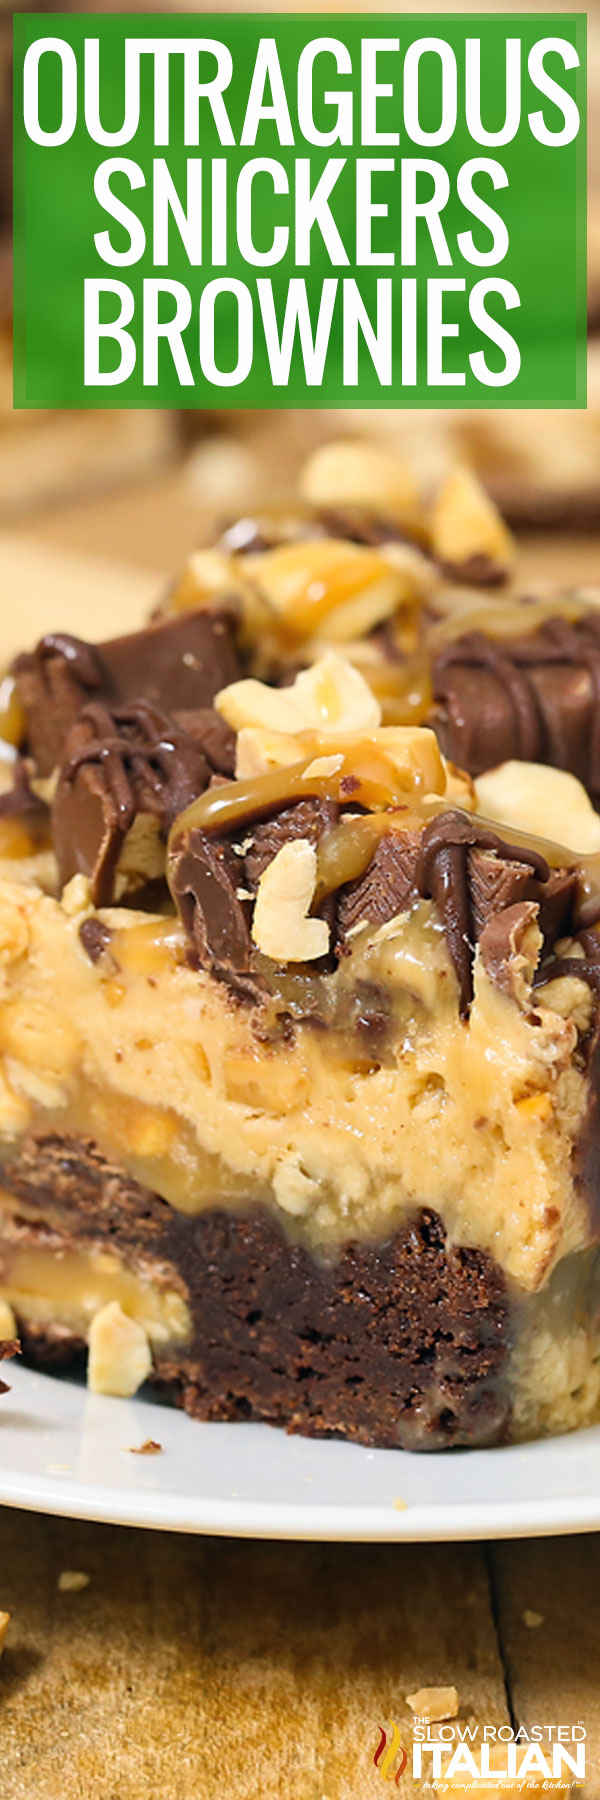 Outrageously Peanutty Snickers Brownies - Pin